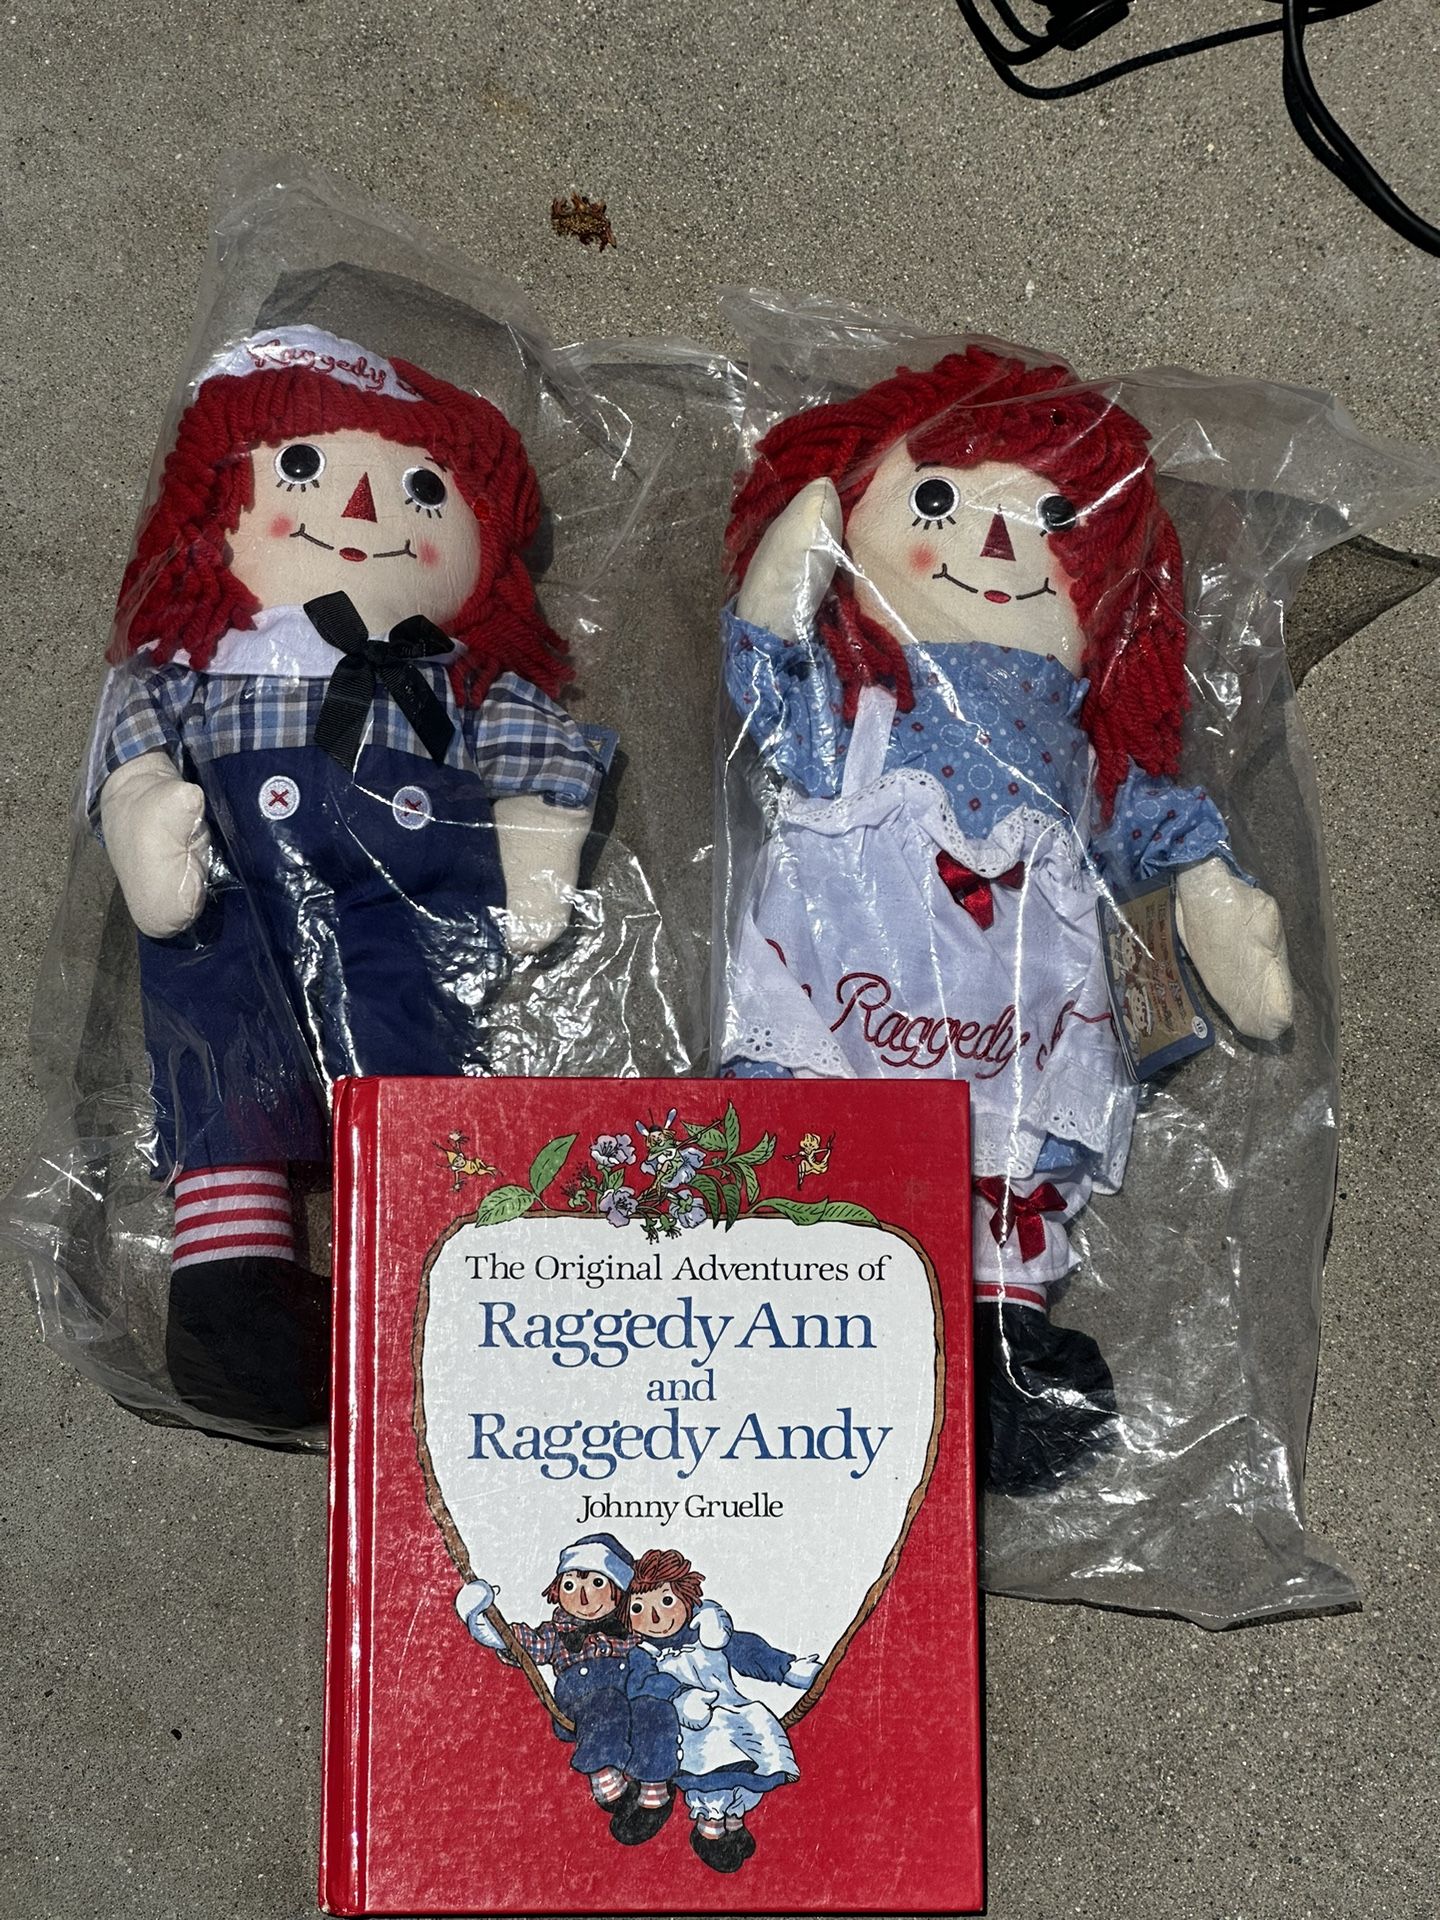 Raggedy Ann and Raggedy Andy Dolls And Book